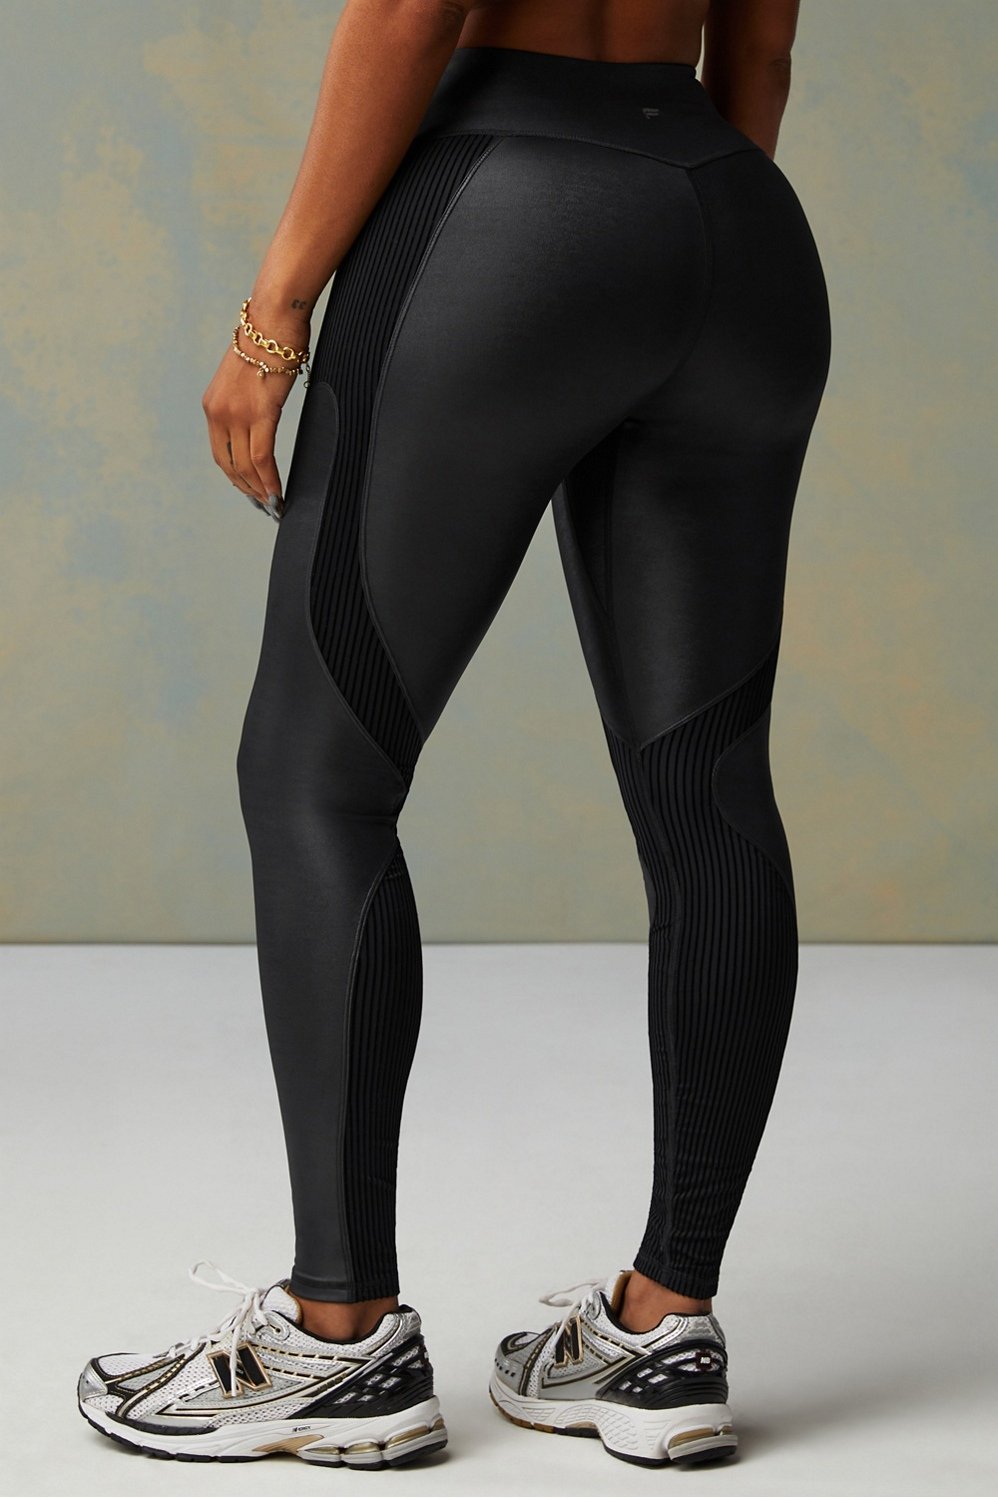 Motion365+ Contour High-Waisted Legging Size: M (FINAL PRICE $65